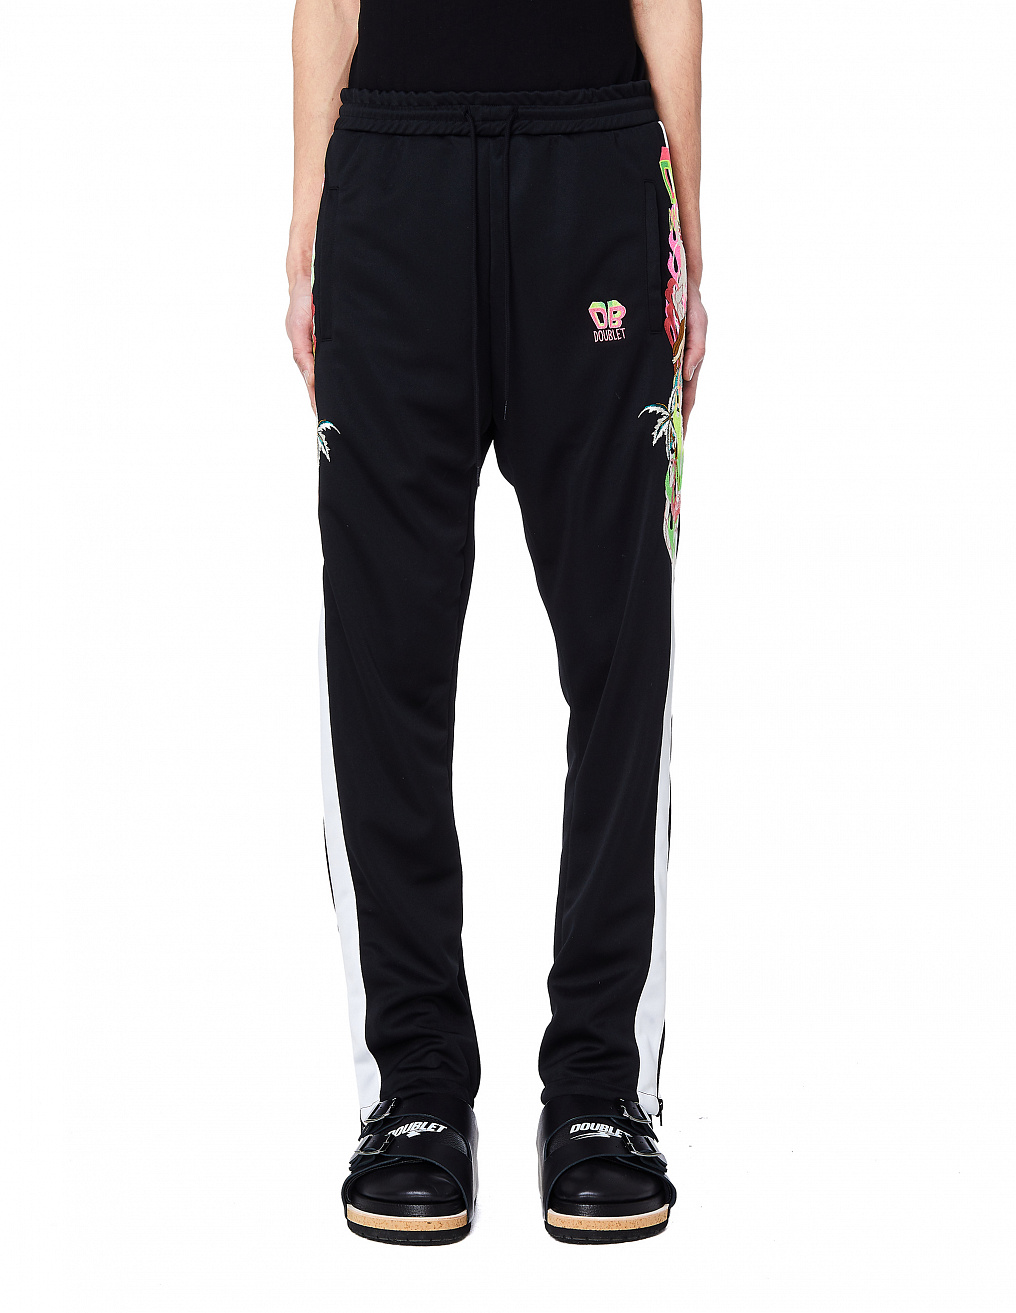 Doublet | Black Chaos Embroidery Track Pants | SVMOSCOW.COM